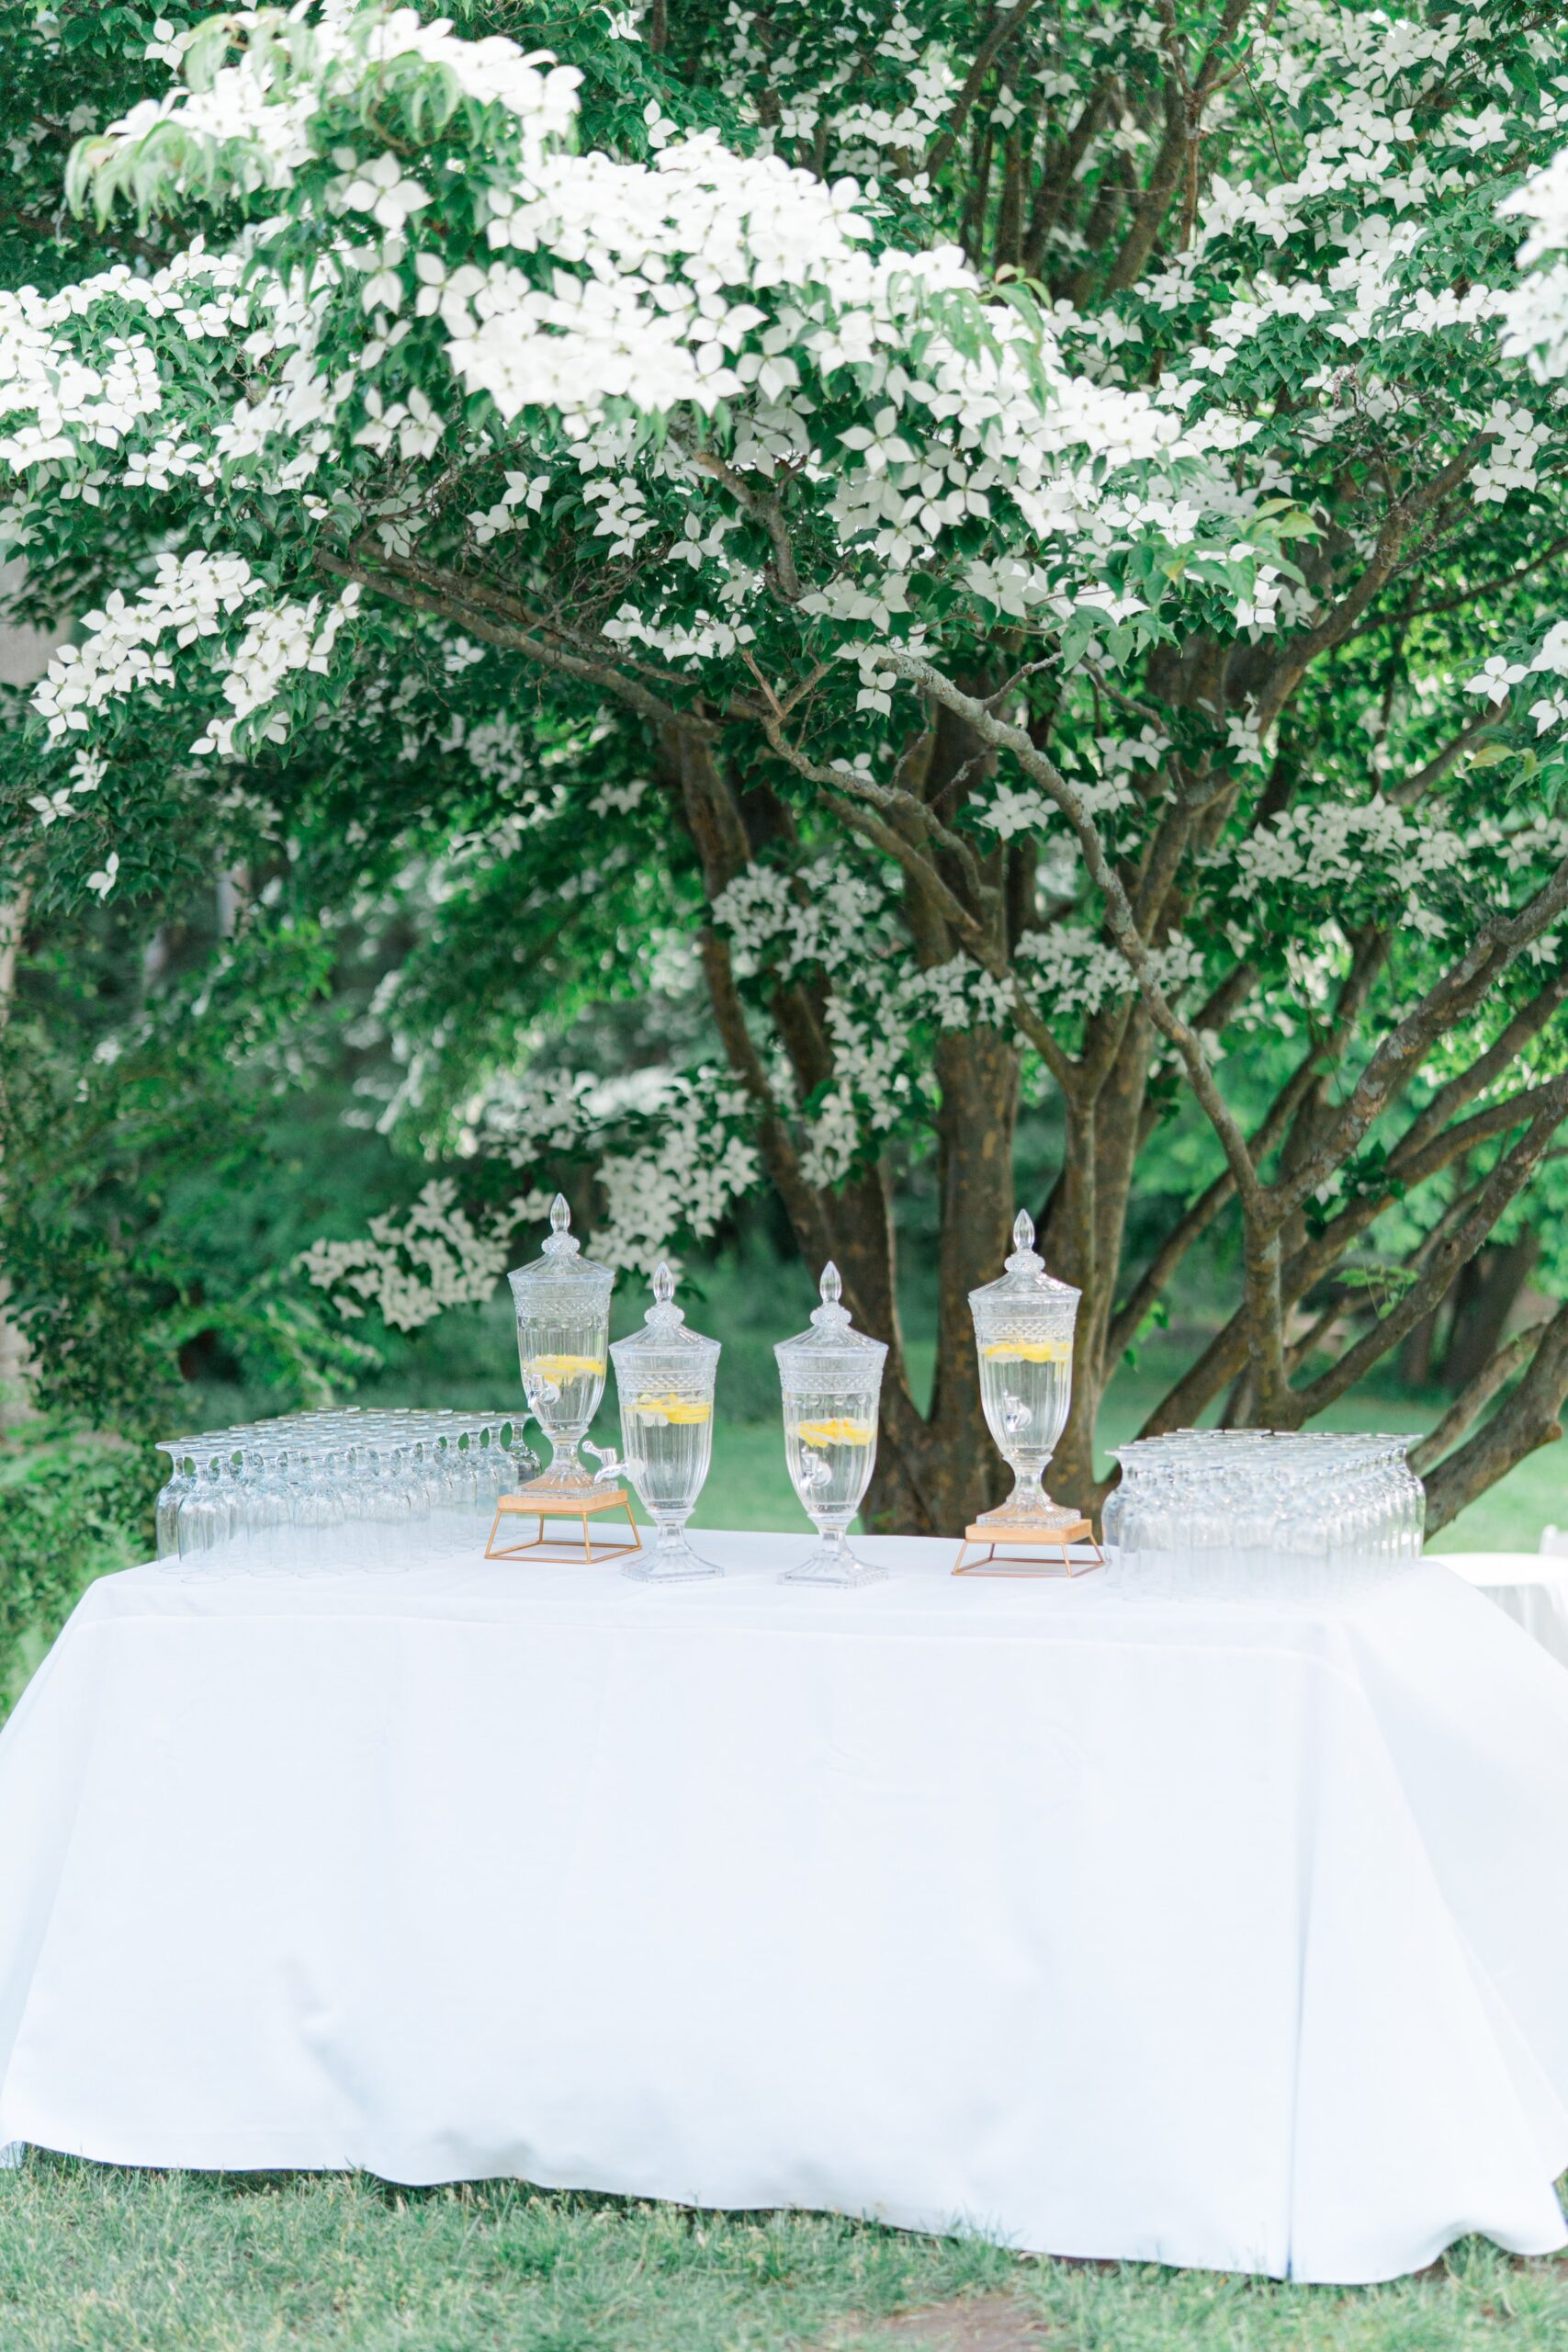 Water station with blooming white flower tree with elegant glass pitchers filled with lemons. Boston wedding photographer.